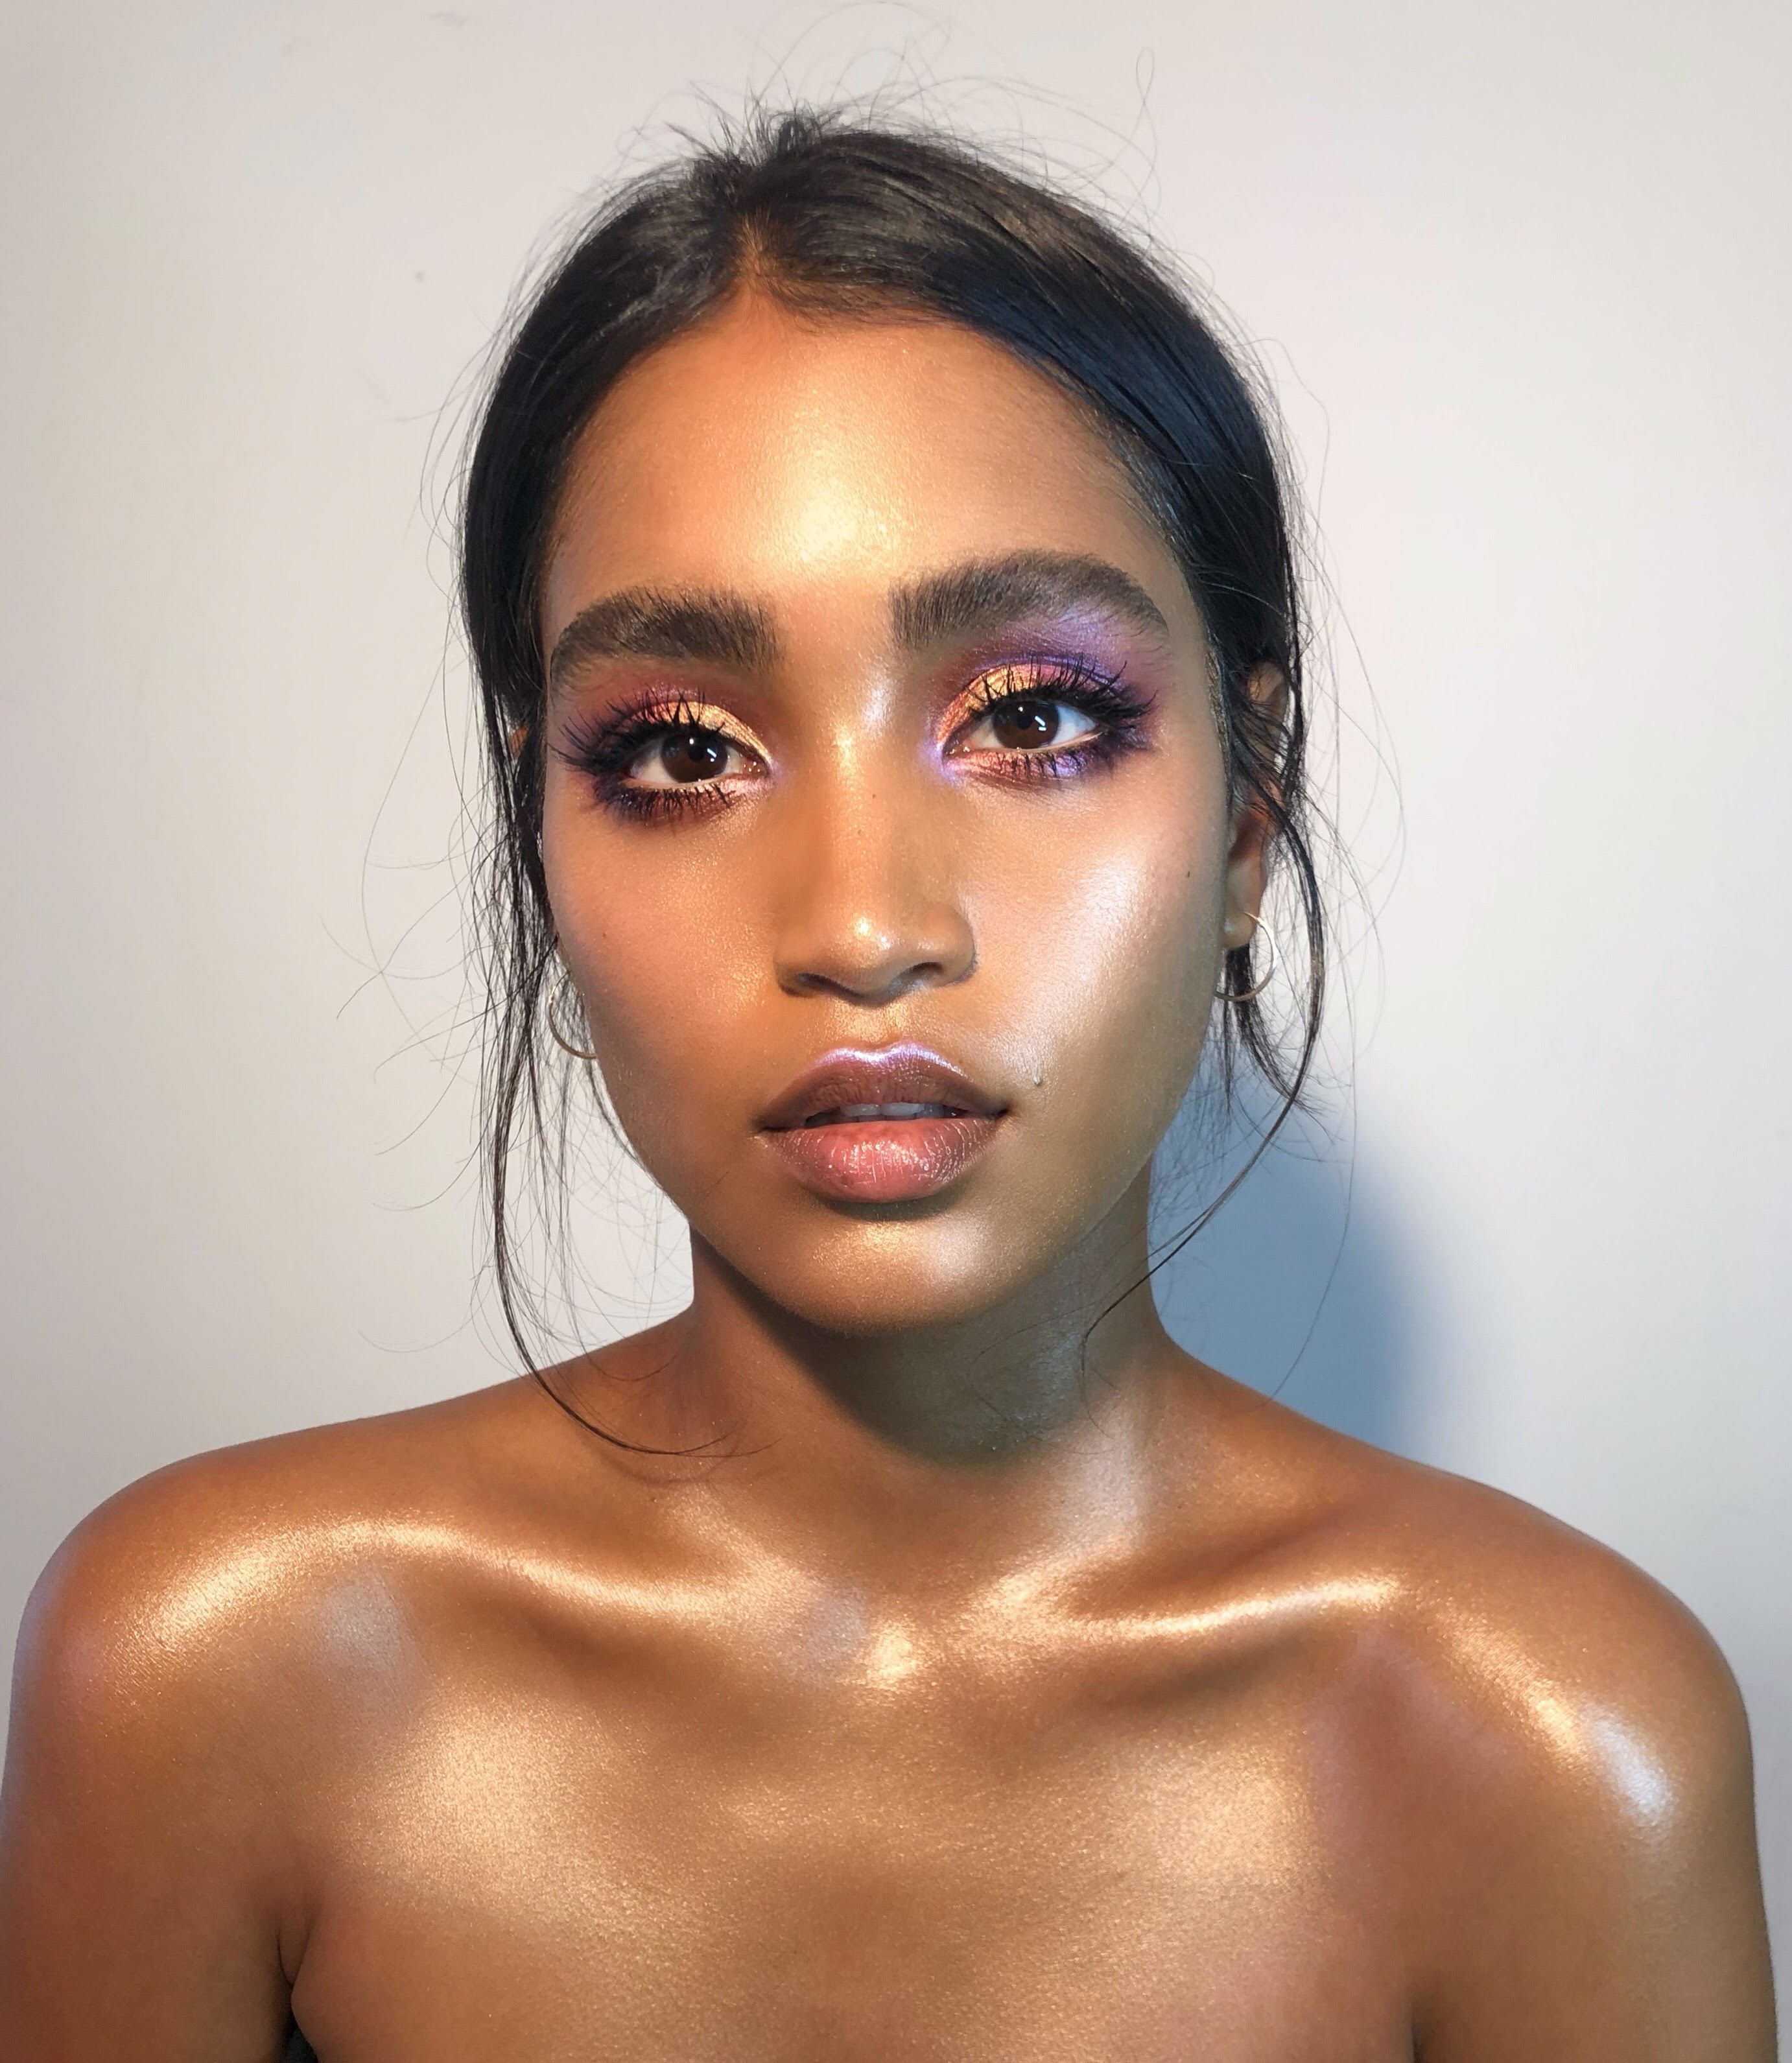 This Makeup Artist Came Up With a Genius 